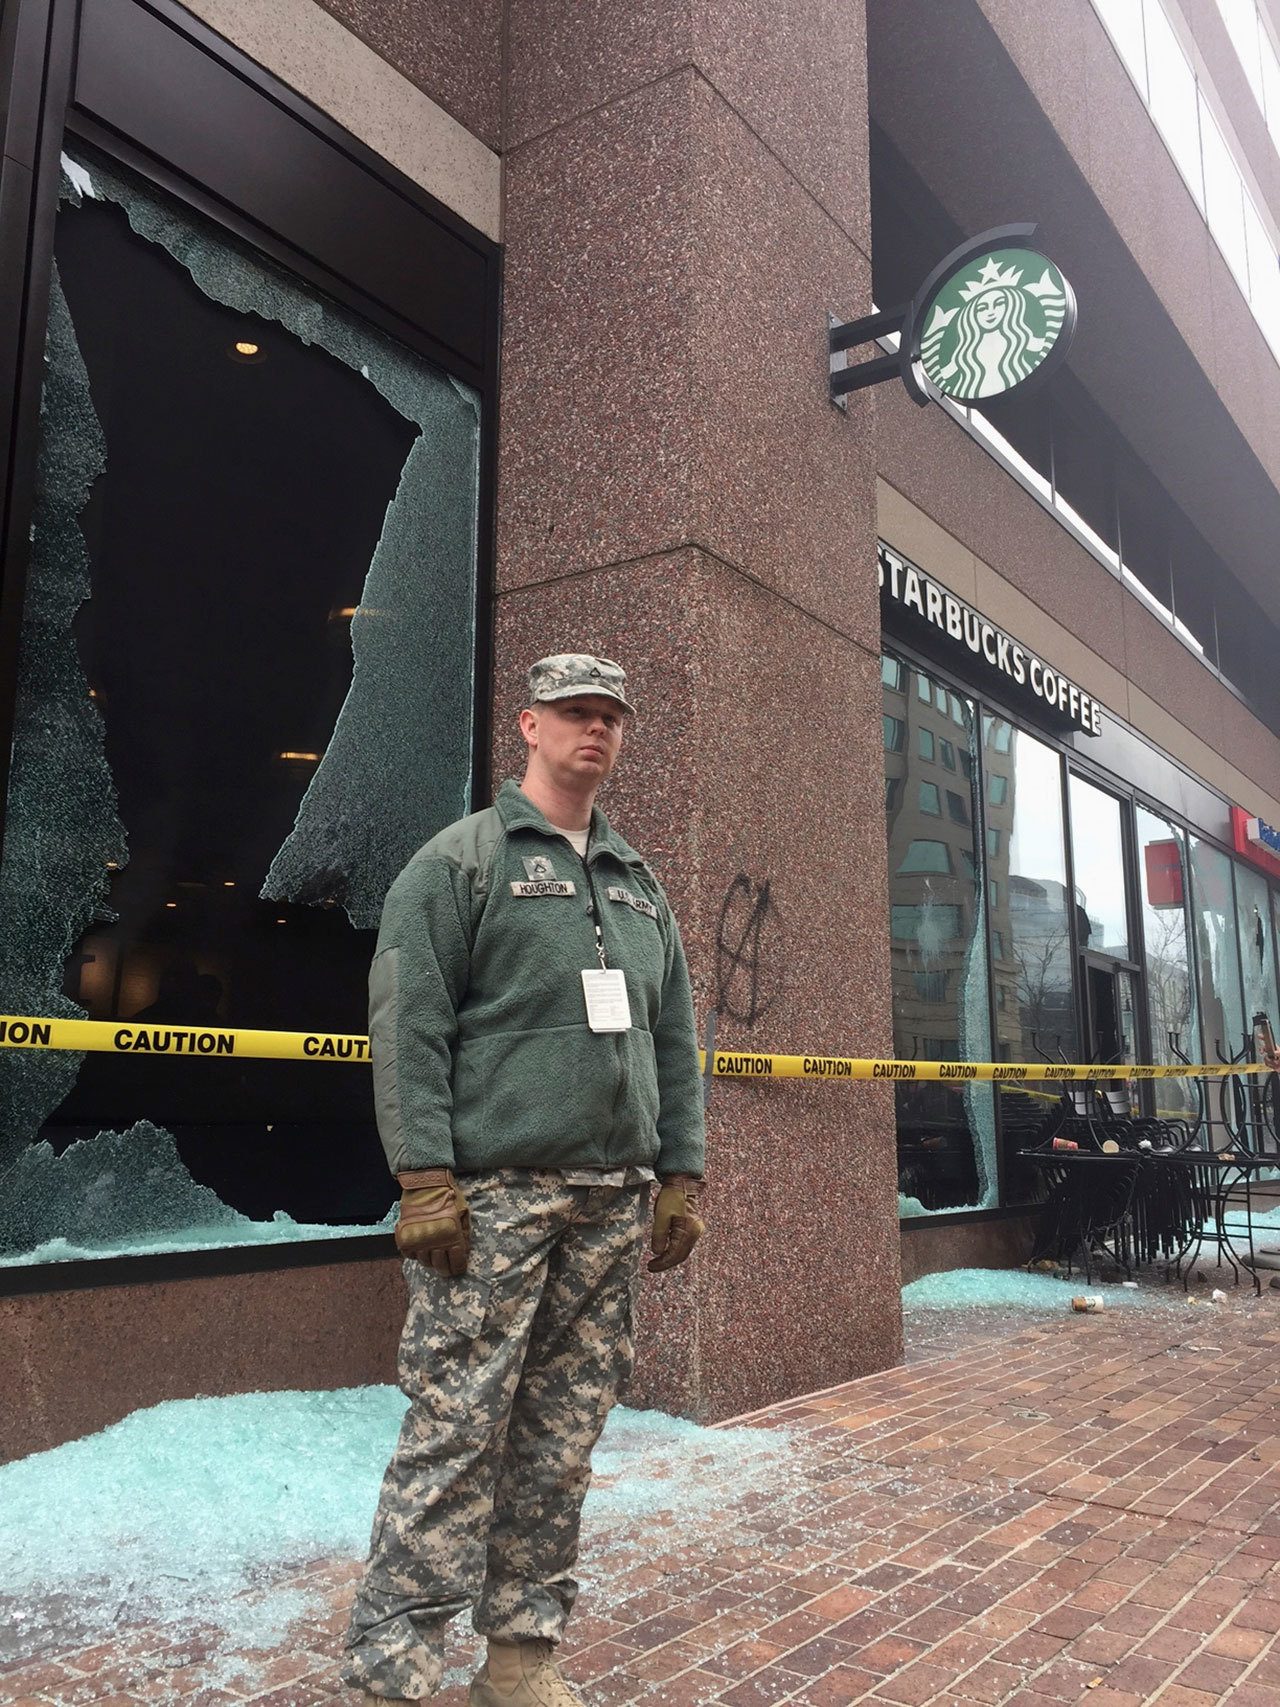 Tape closes off broken windows at businesses in Washington, D.C., after a confrontation with protestors blocks from President Donald Trump’s inauguration. (The Associated Press)